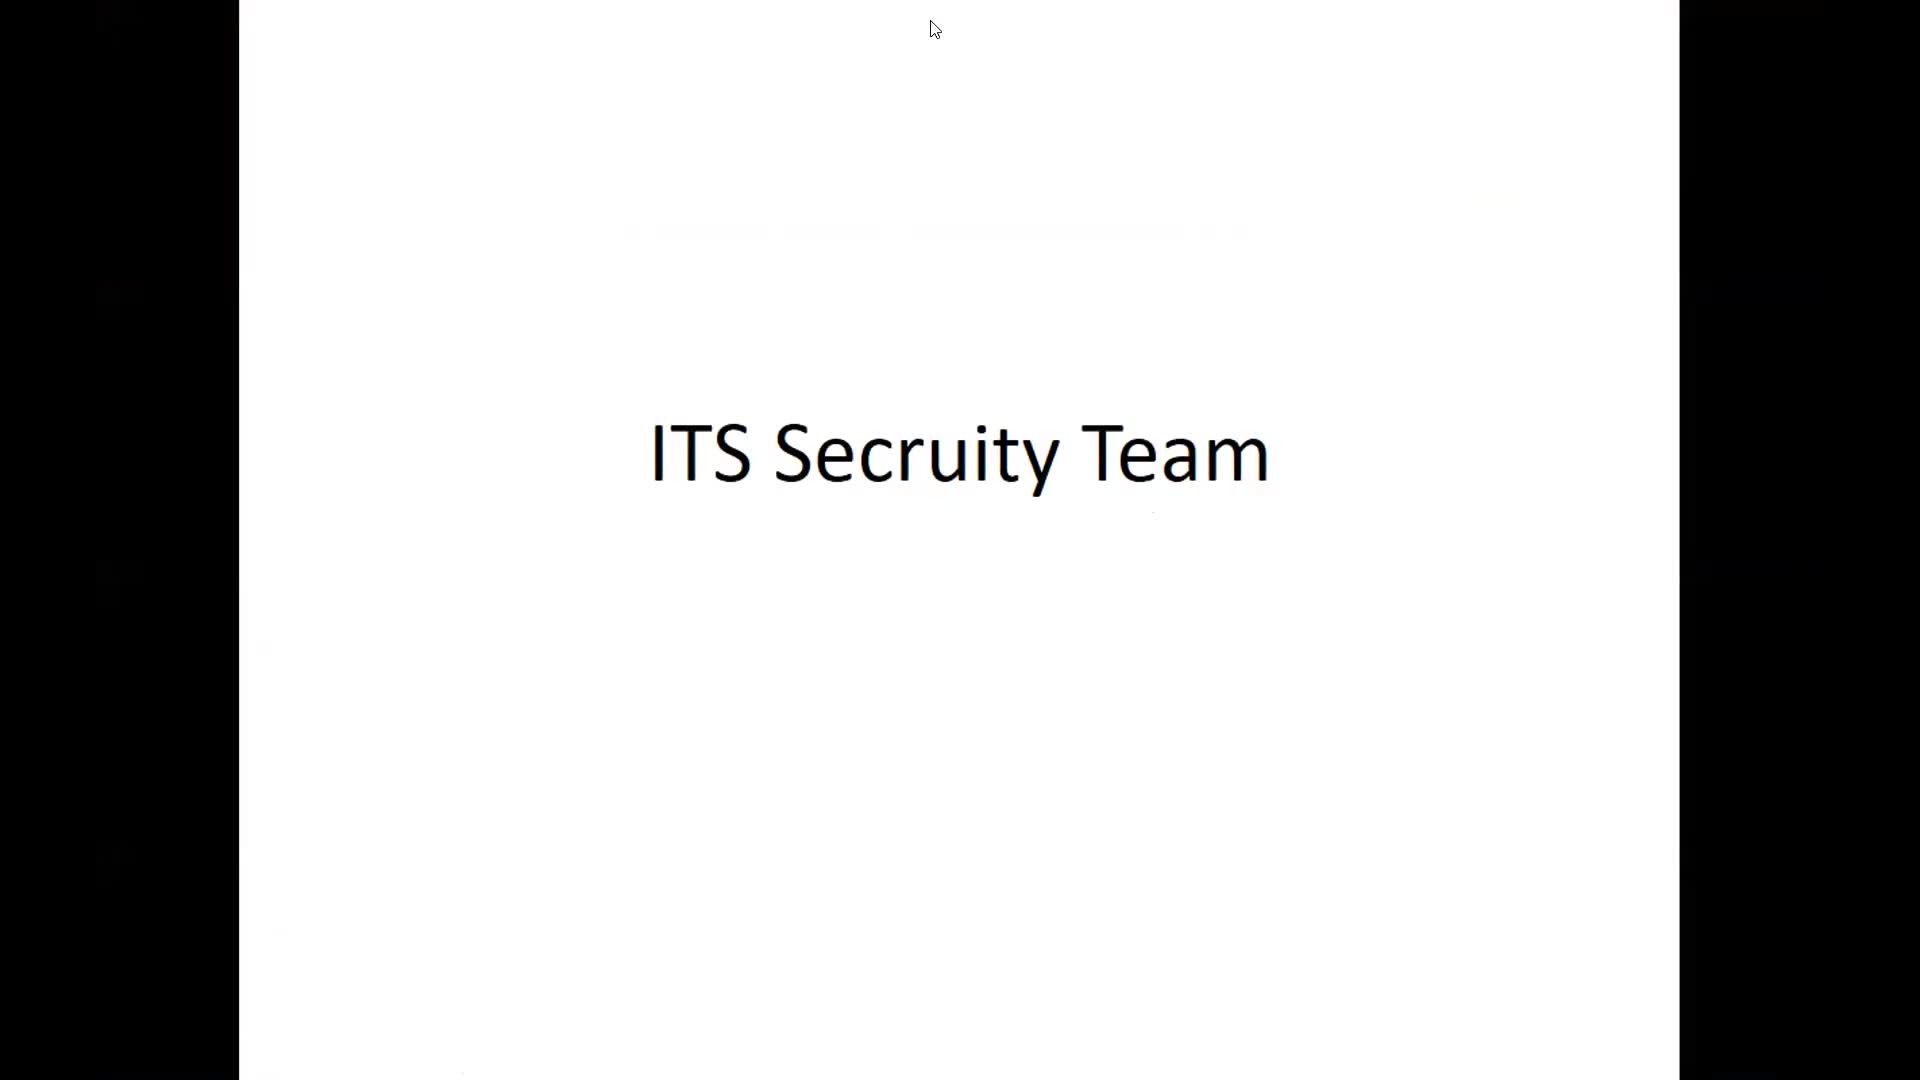 Meet the ITS Security Team